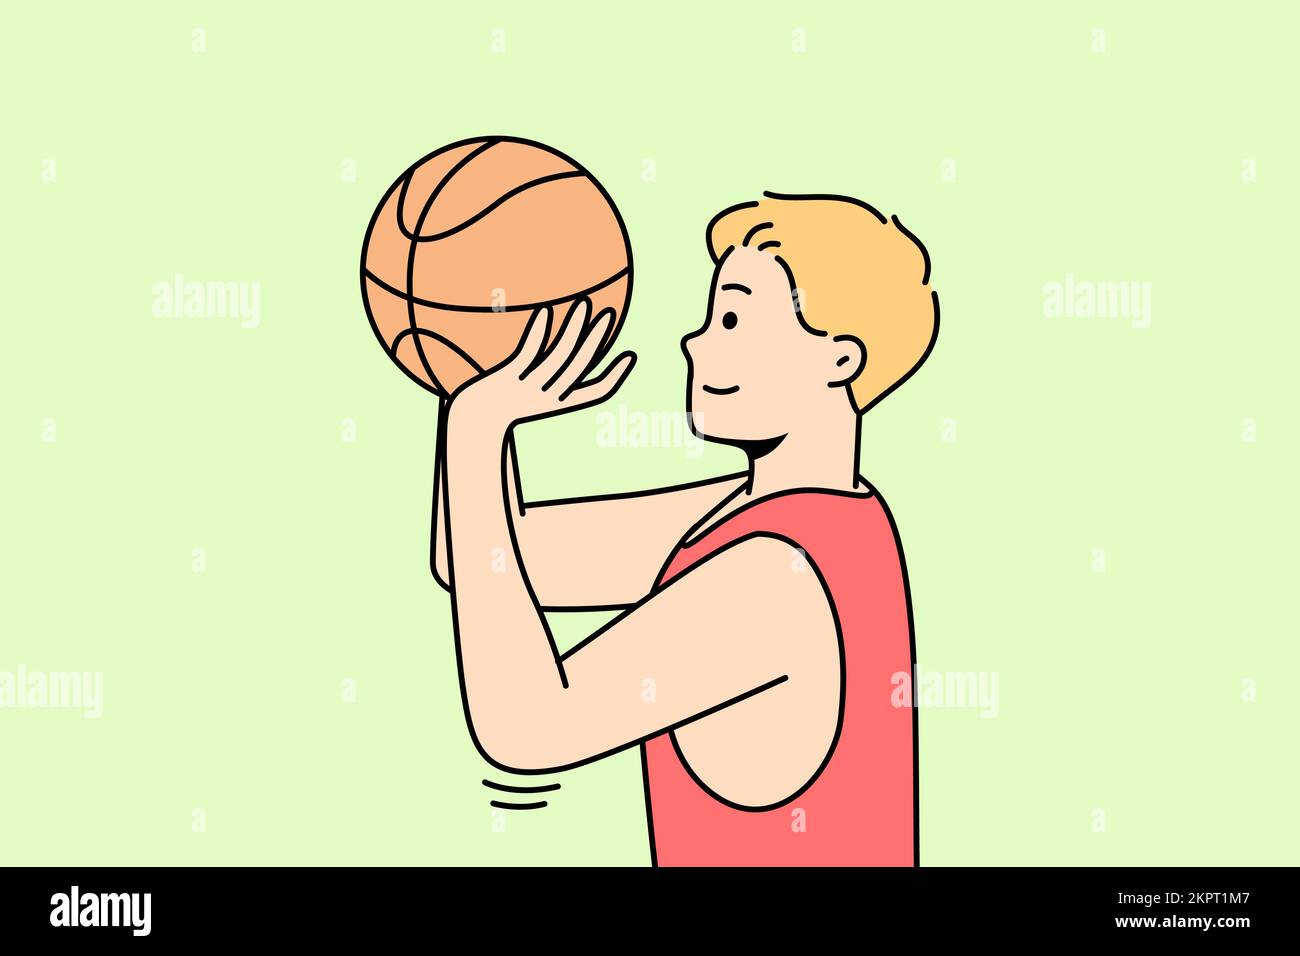 Boy throws ball into hoop or through net. Guy playing basketball or volleyball on court. Basketballer, hoopster, player trying to hit into rim. Sportsman practices drills. Young man training. Stock Vector